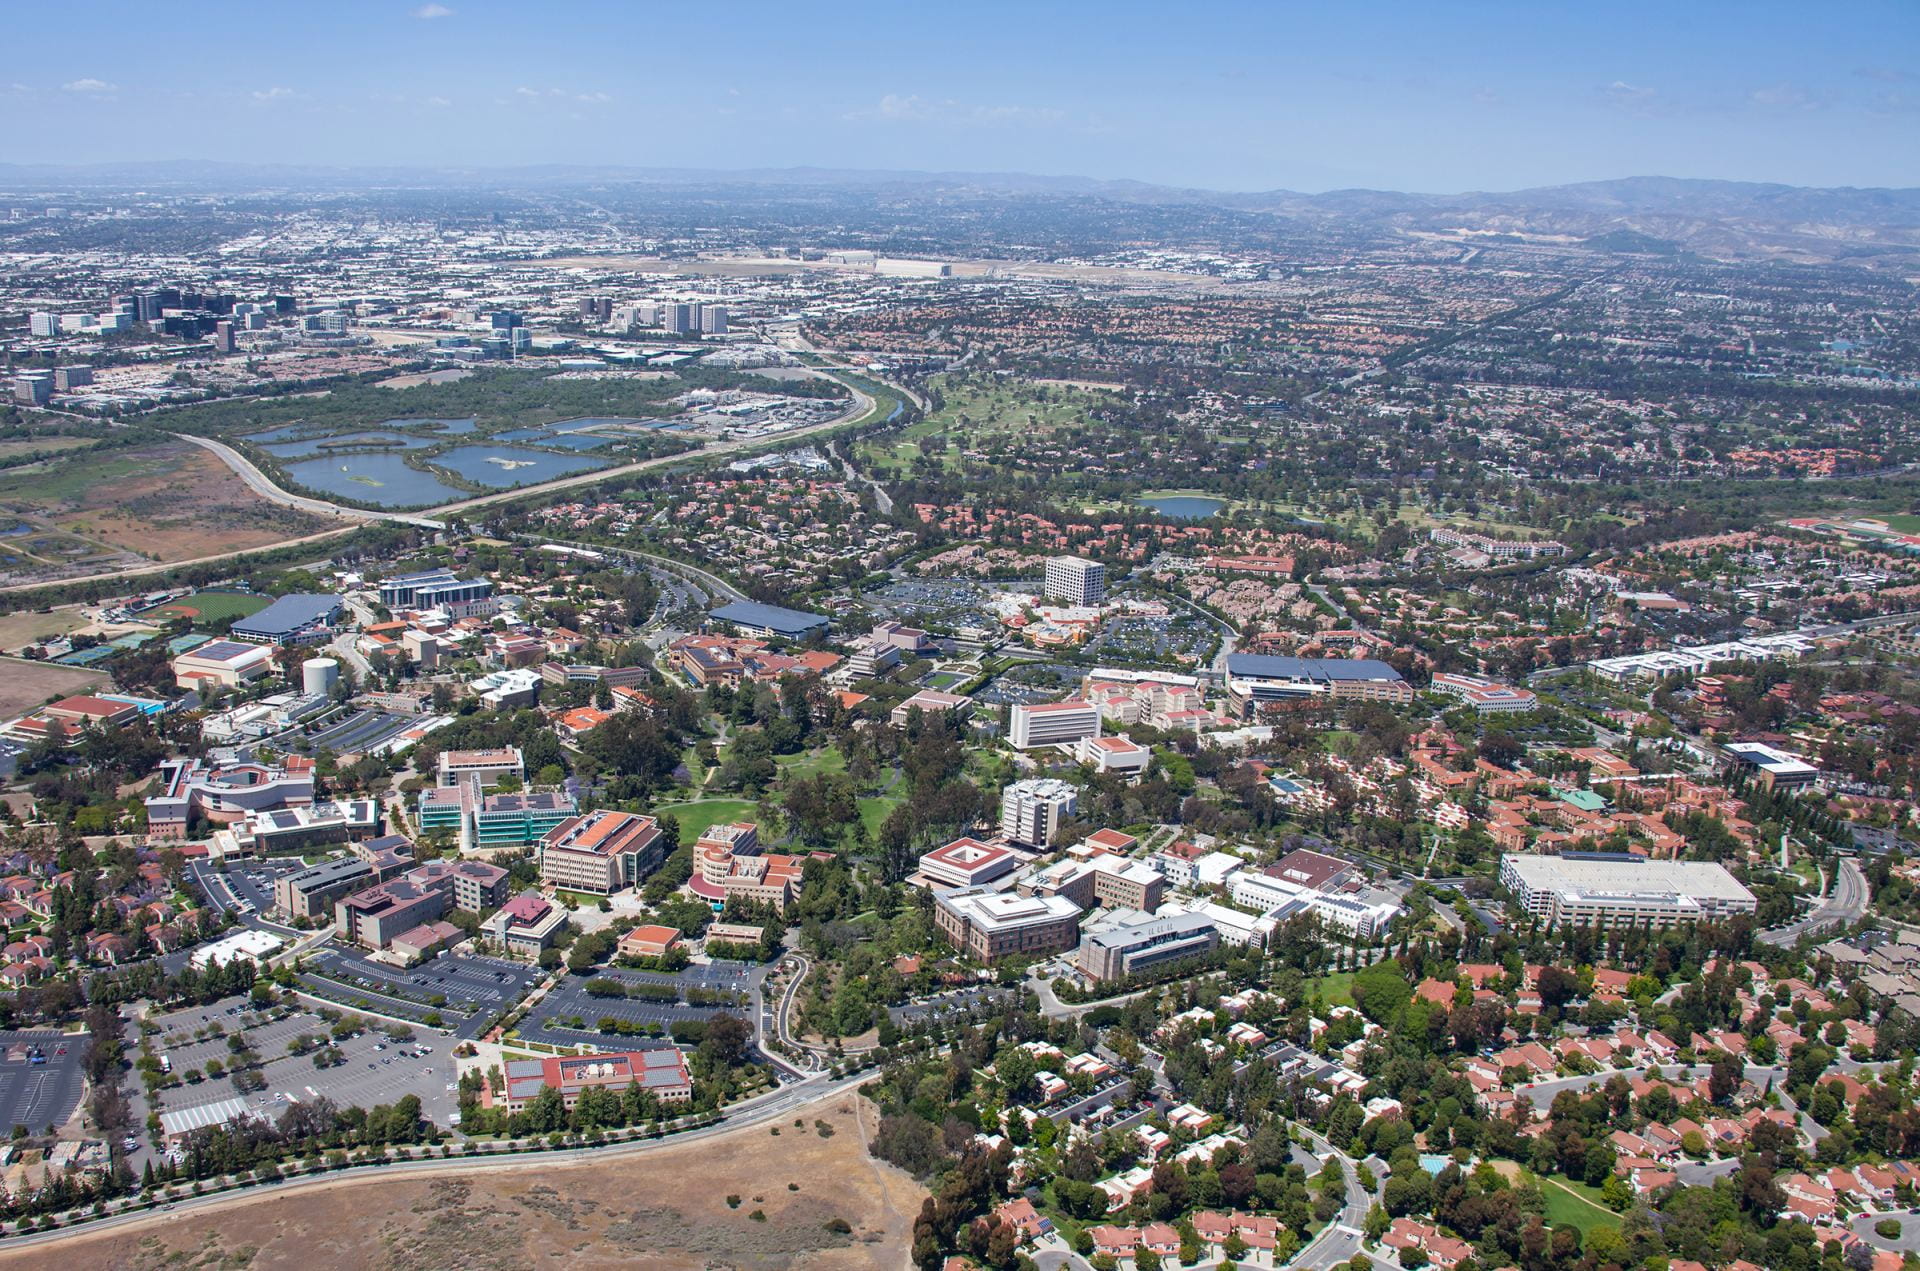 Aerial photo of the city of Irvine